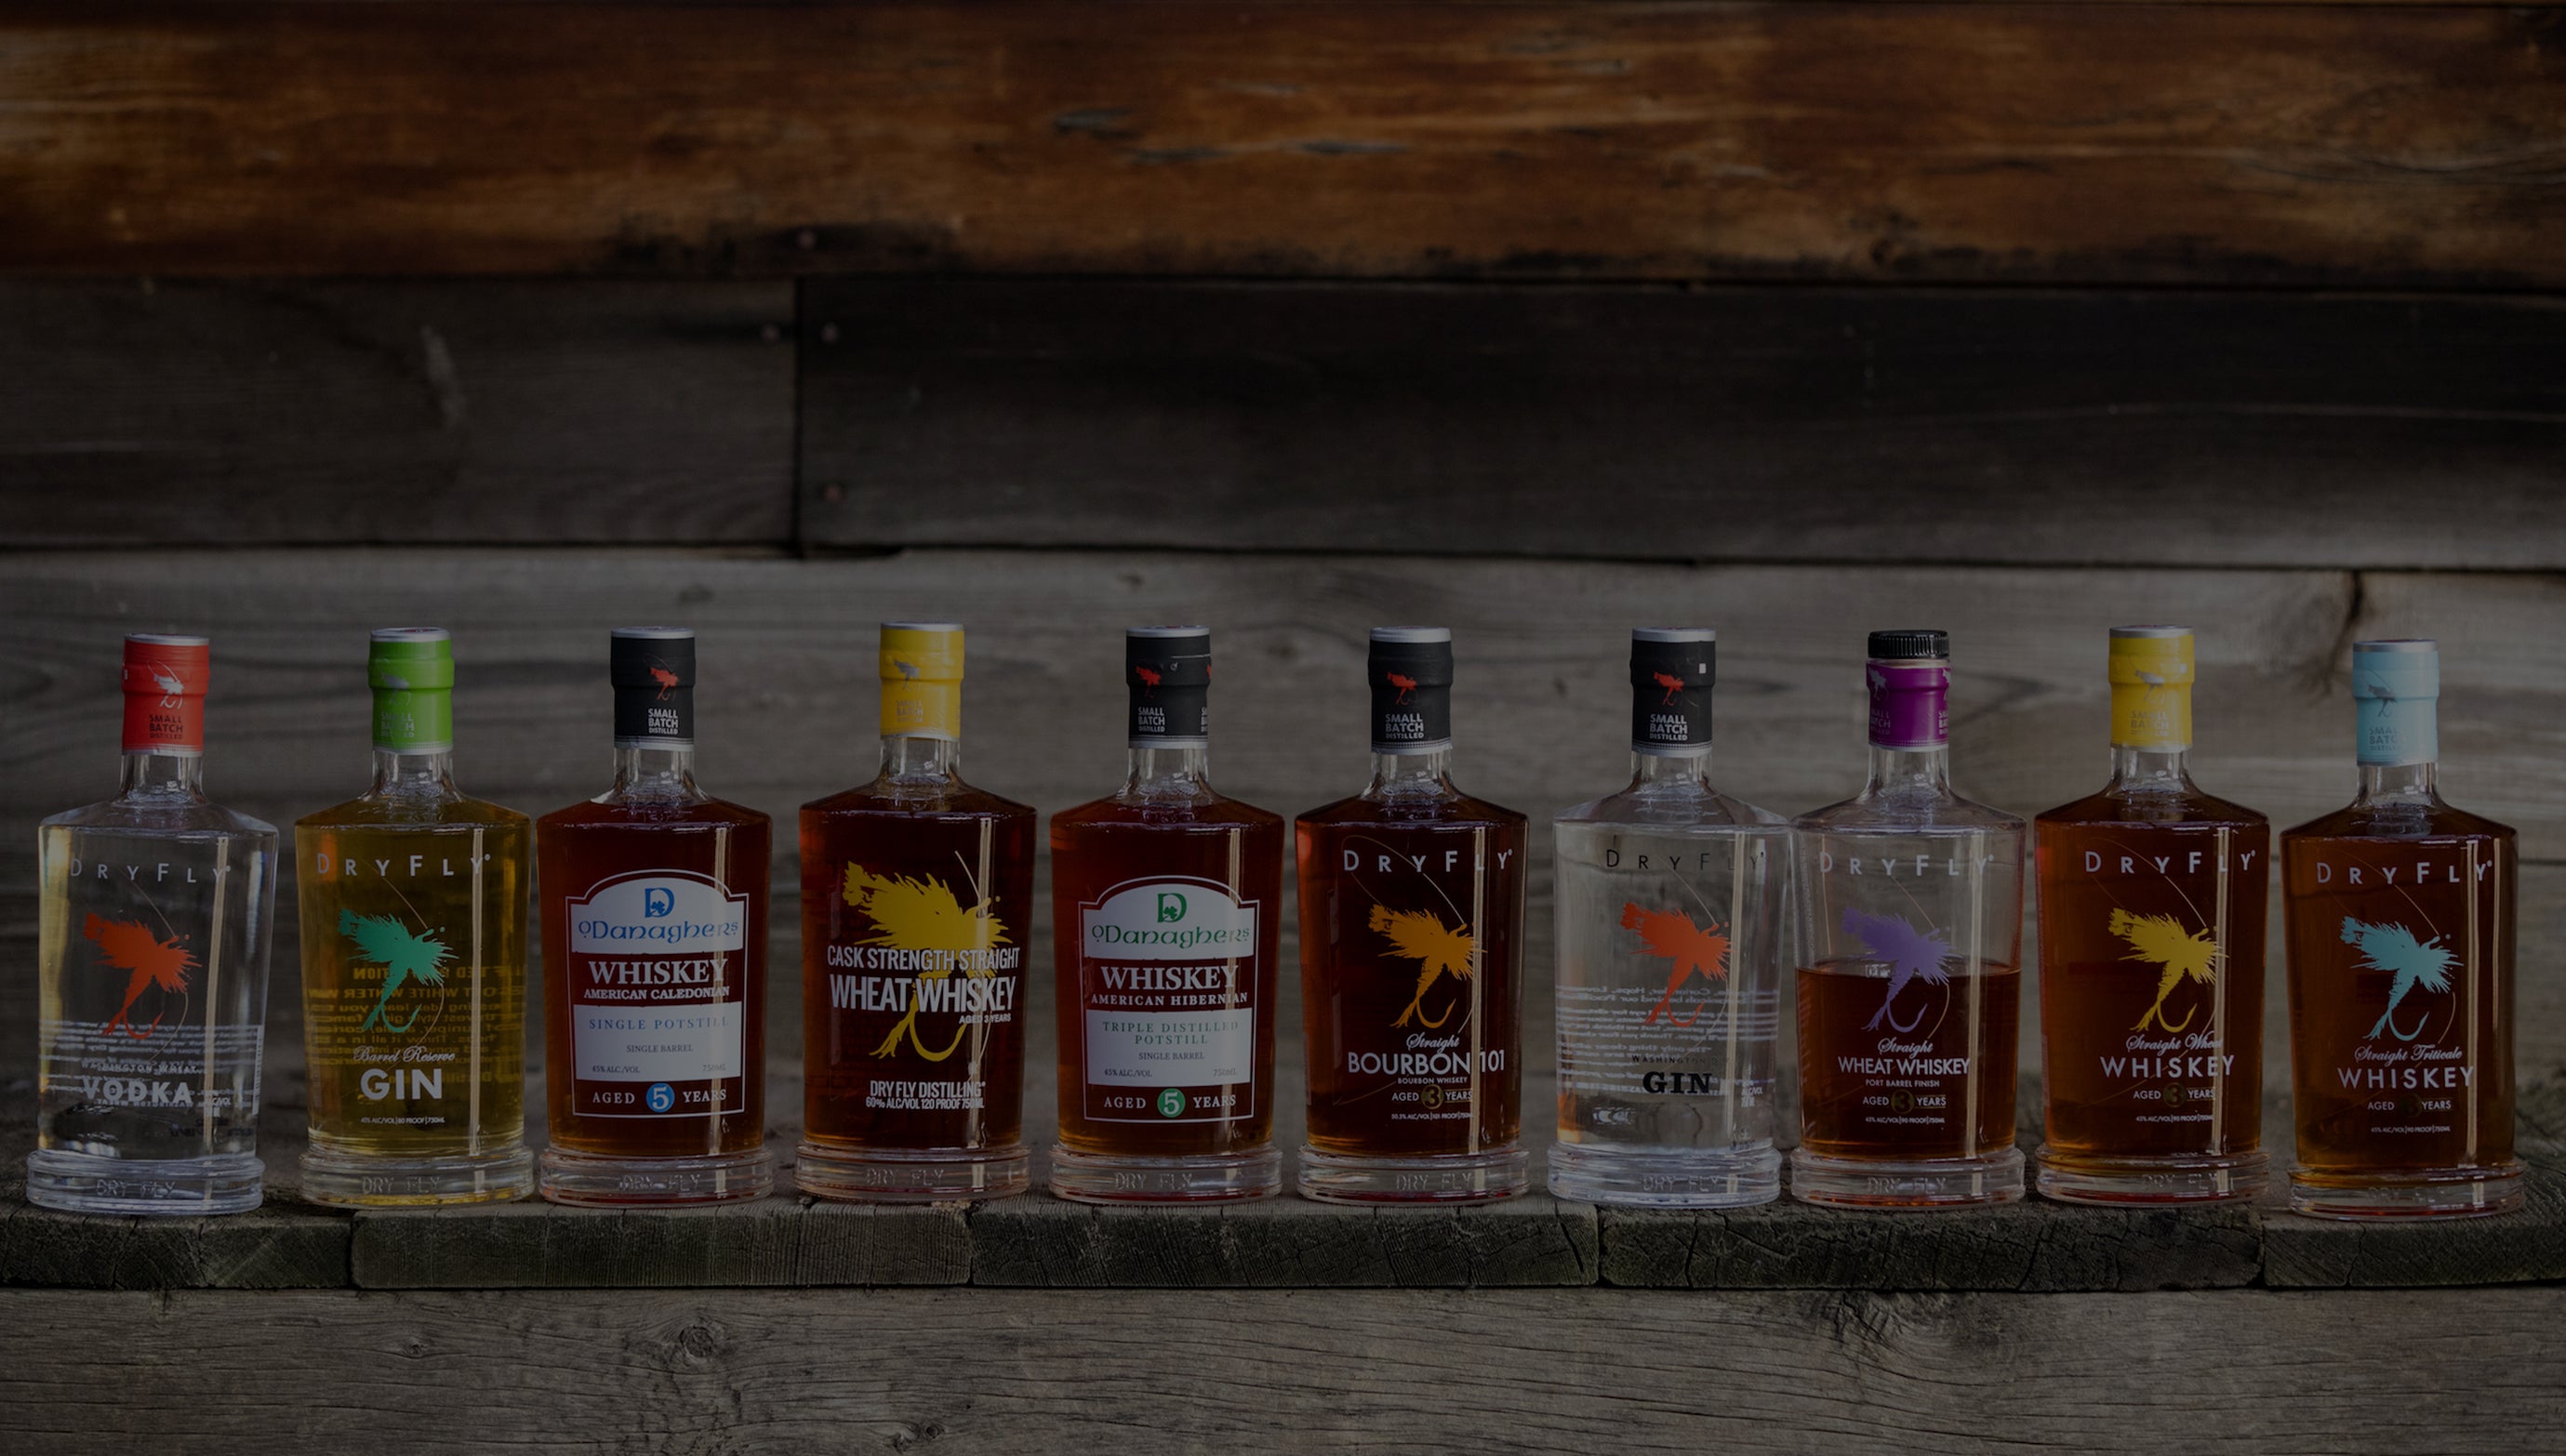 Dry Fly Straight Bourbon 101 – Dry Fly Distilling